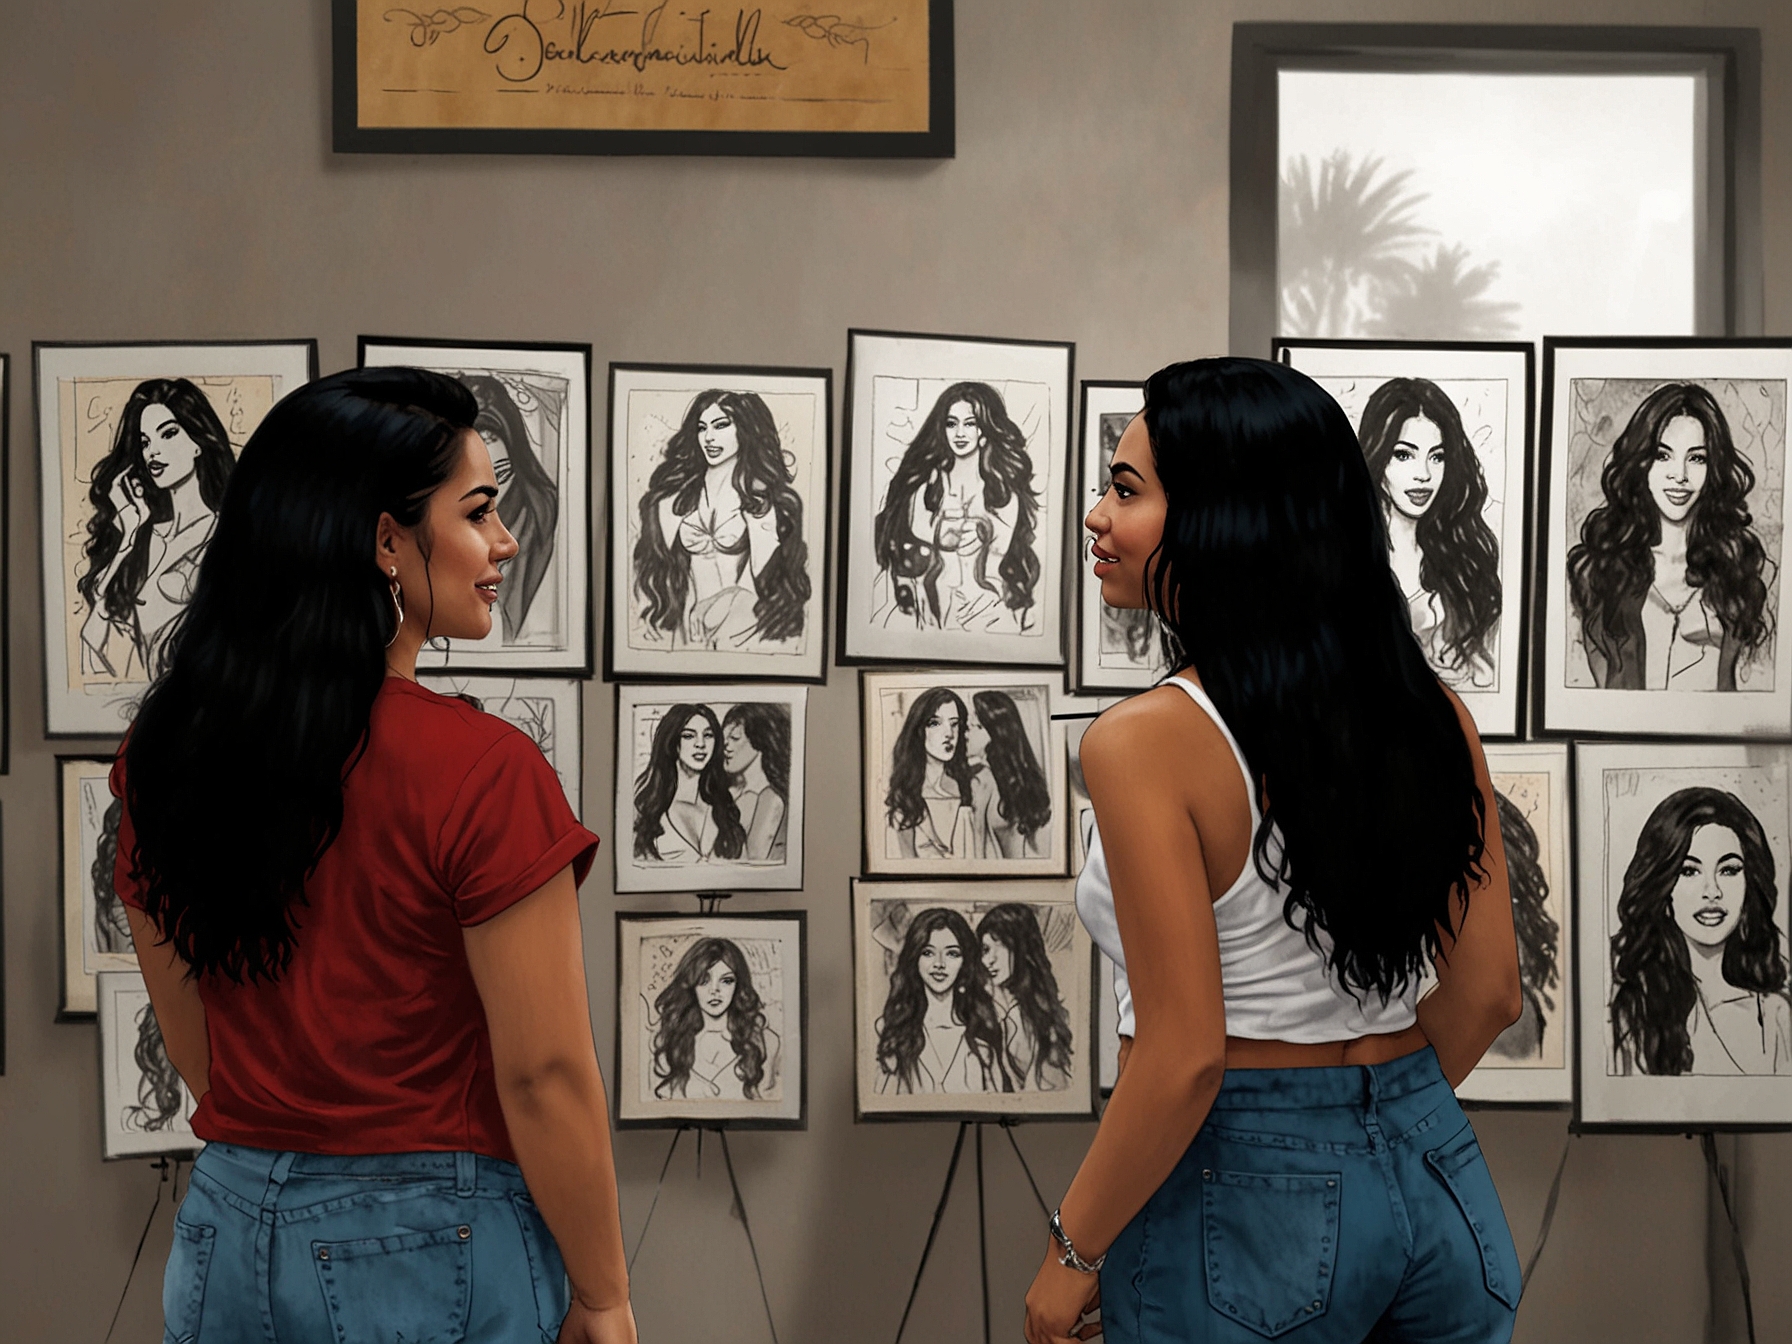 Selena Quintanilla fans gather to admire Andrew Longoria's extensive collection, displayed in a grand showcase in Lake Jackson, reflecting on her enduring legacy and musical contributions.